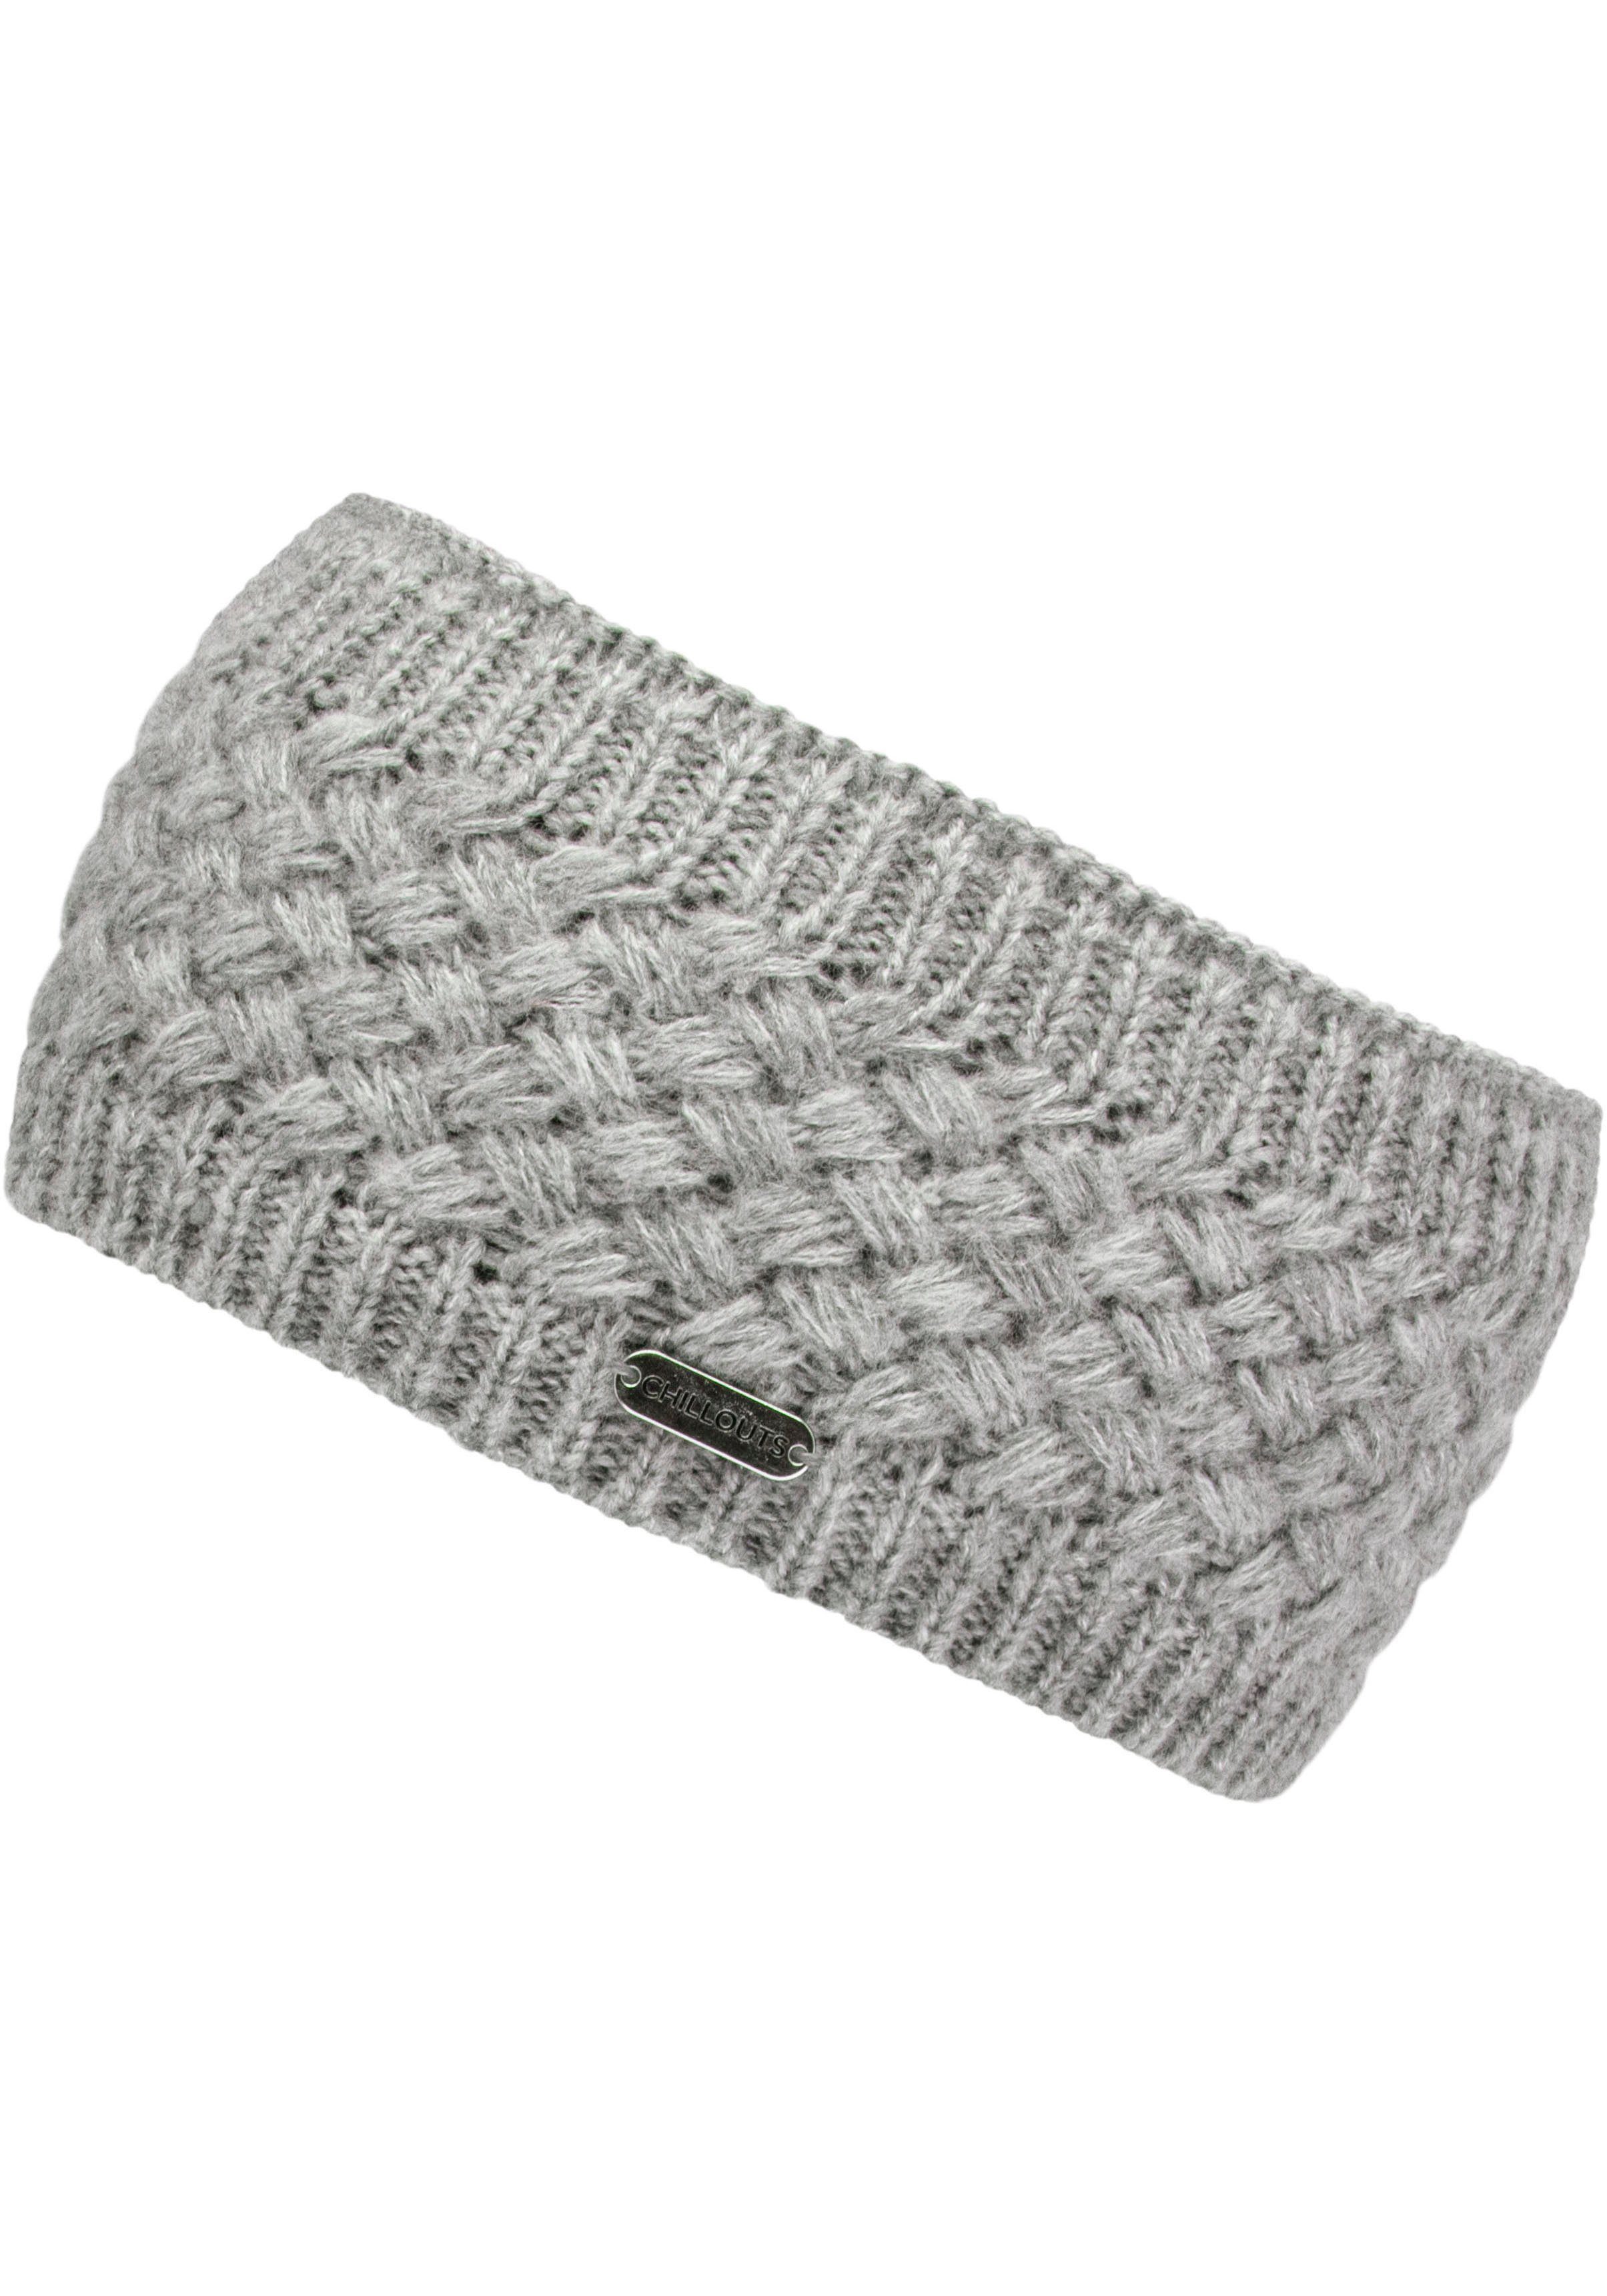 Felicitas chillouts grey Metall-Label Headband Stirnband